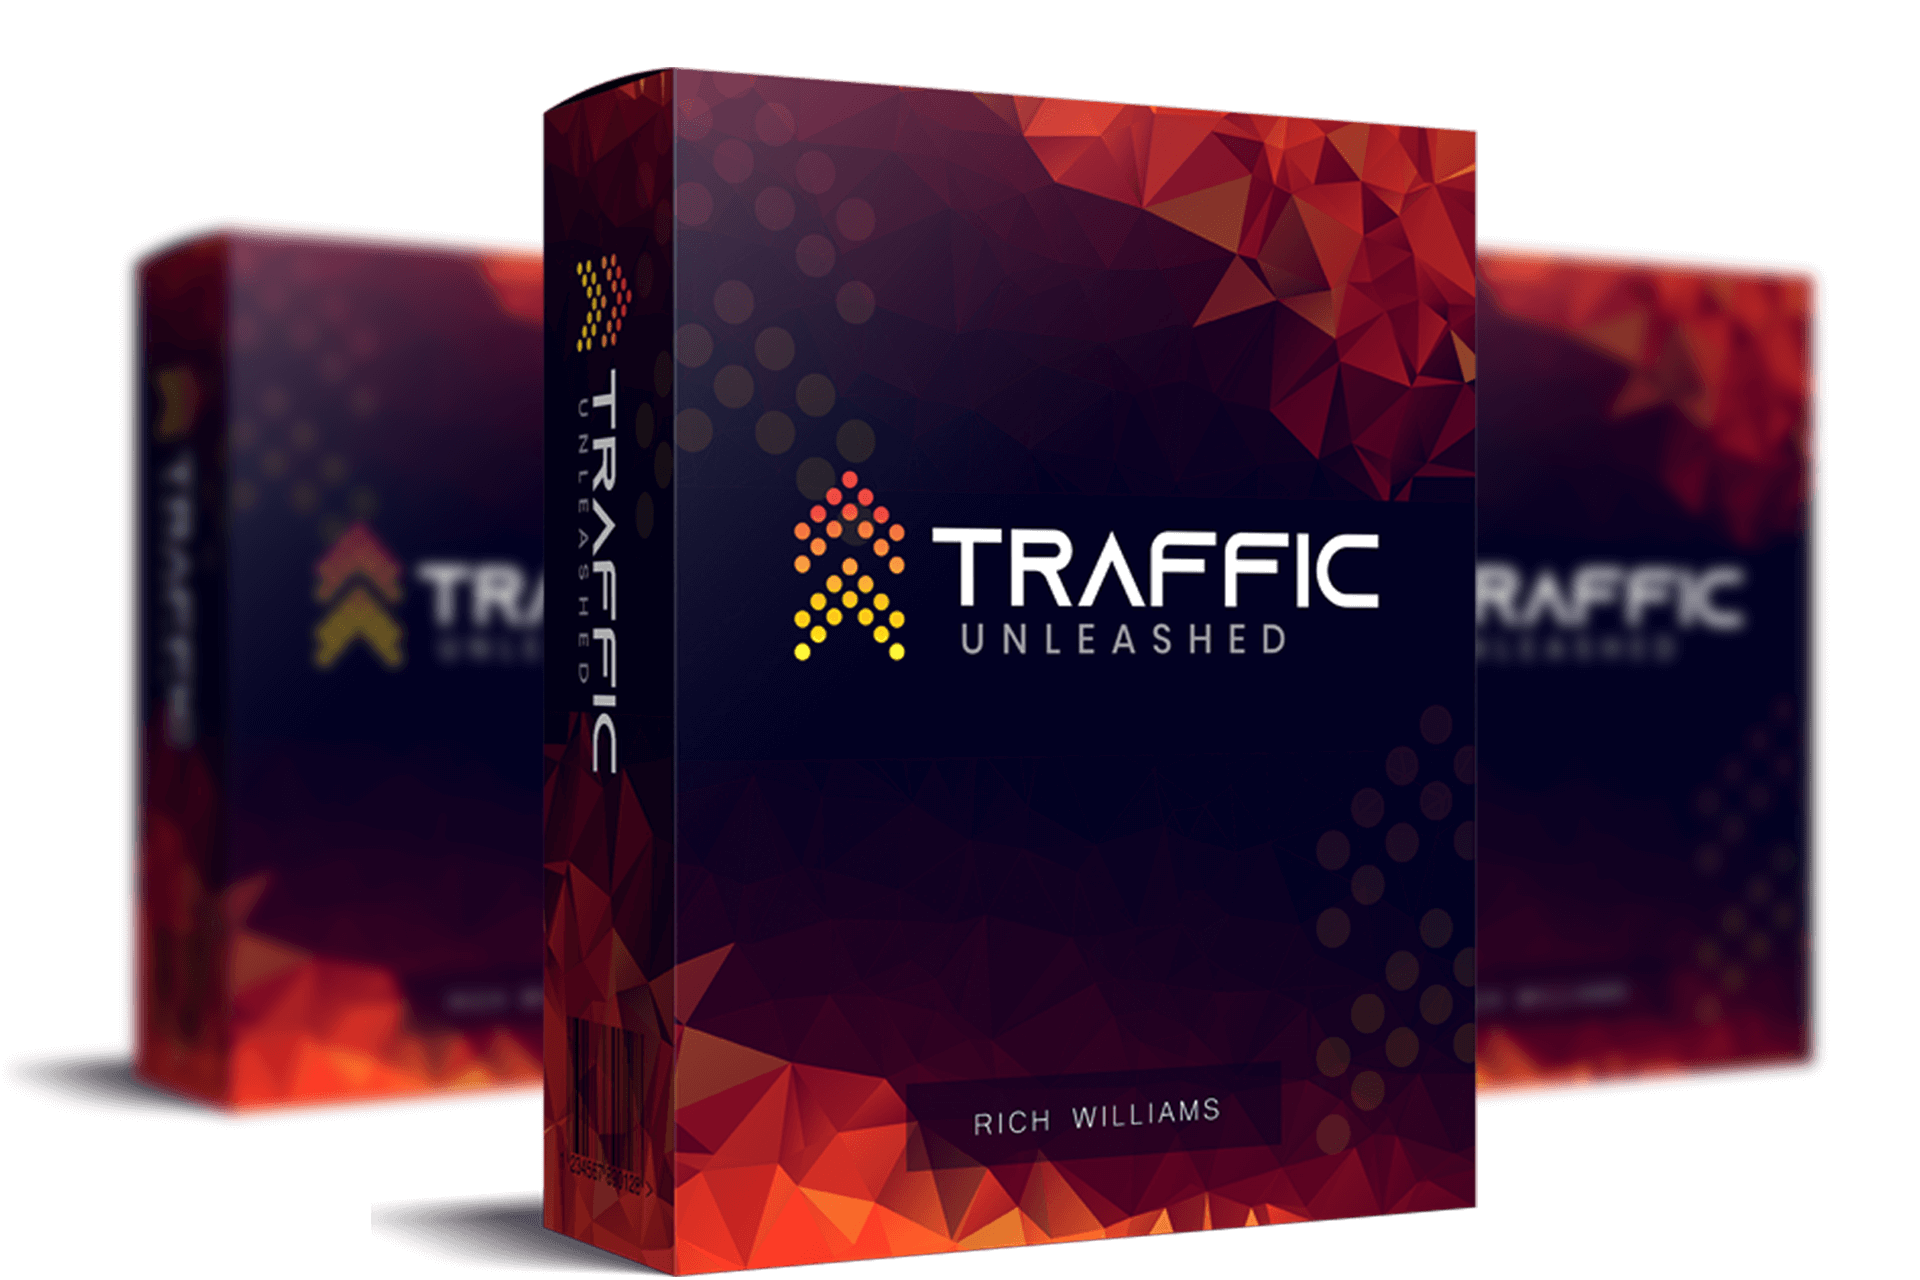 [GET] Traffic Unleashed by Rich Williams and Yves Kouyo Free Download